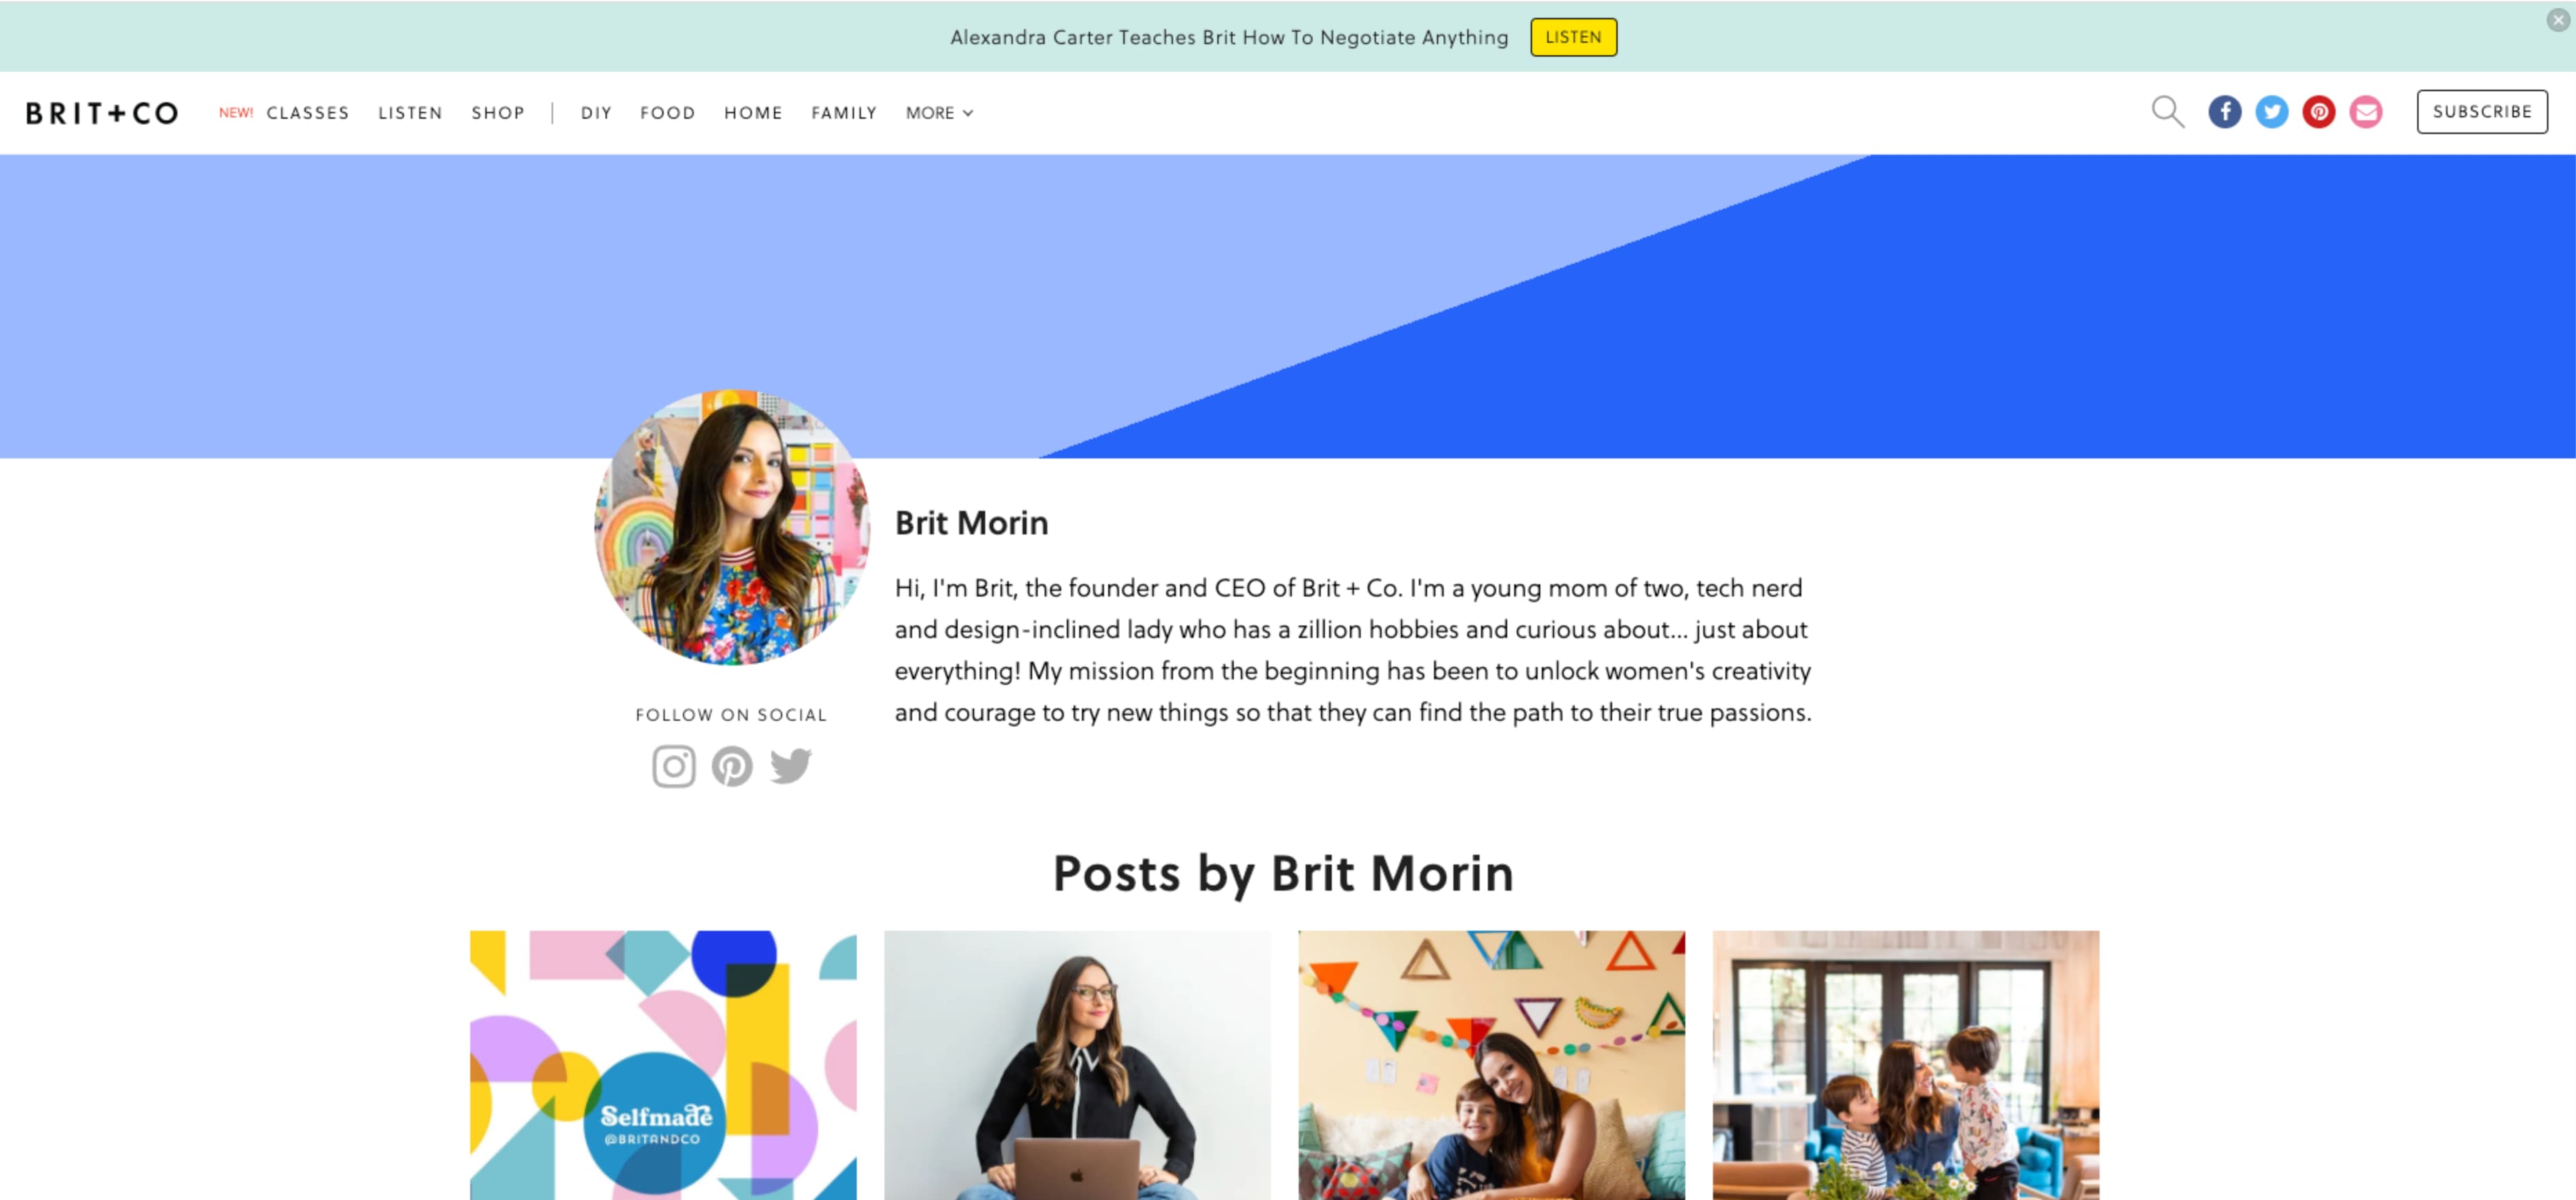 Brit & Co blogs layout is great example of good design. It uses a simple grid layout, relevant tags and titles, and vivid imagery.